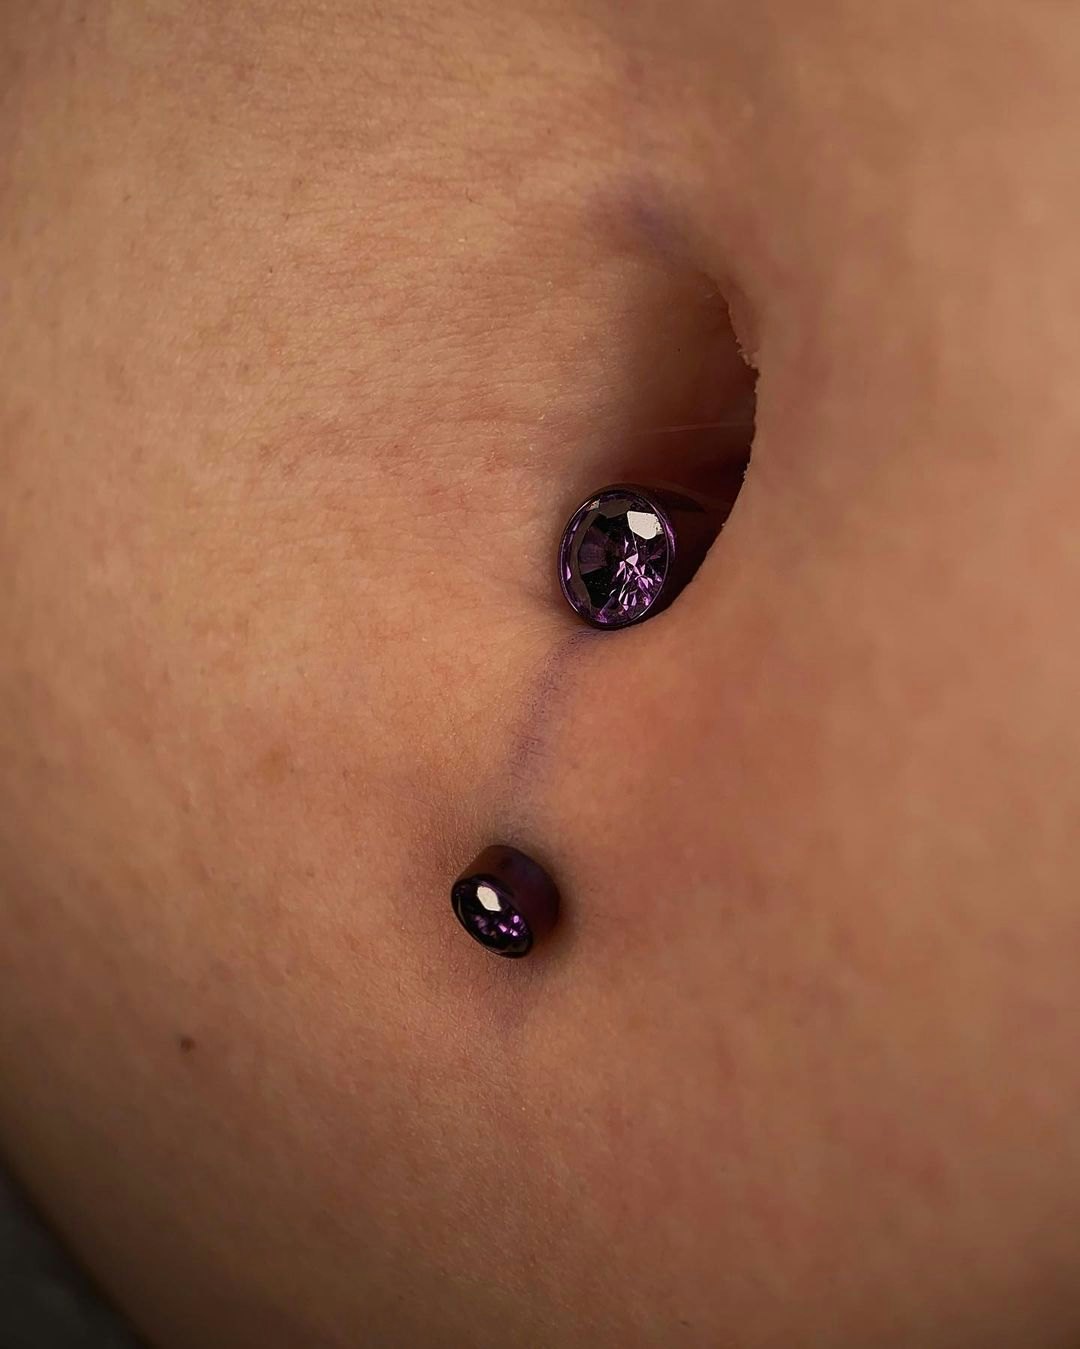 i got my belly pierced today, is it too deep??? i can't really see